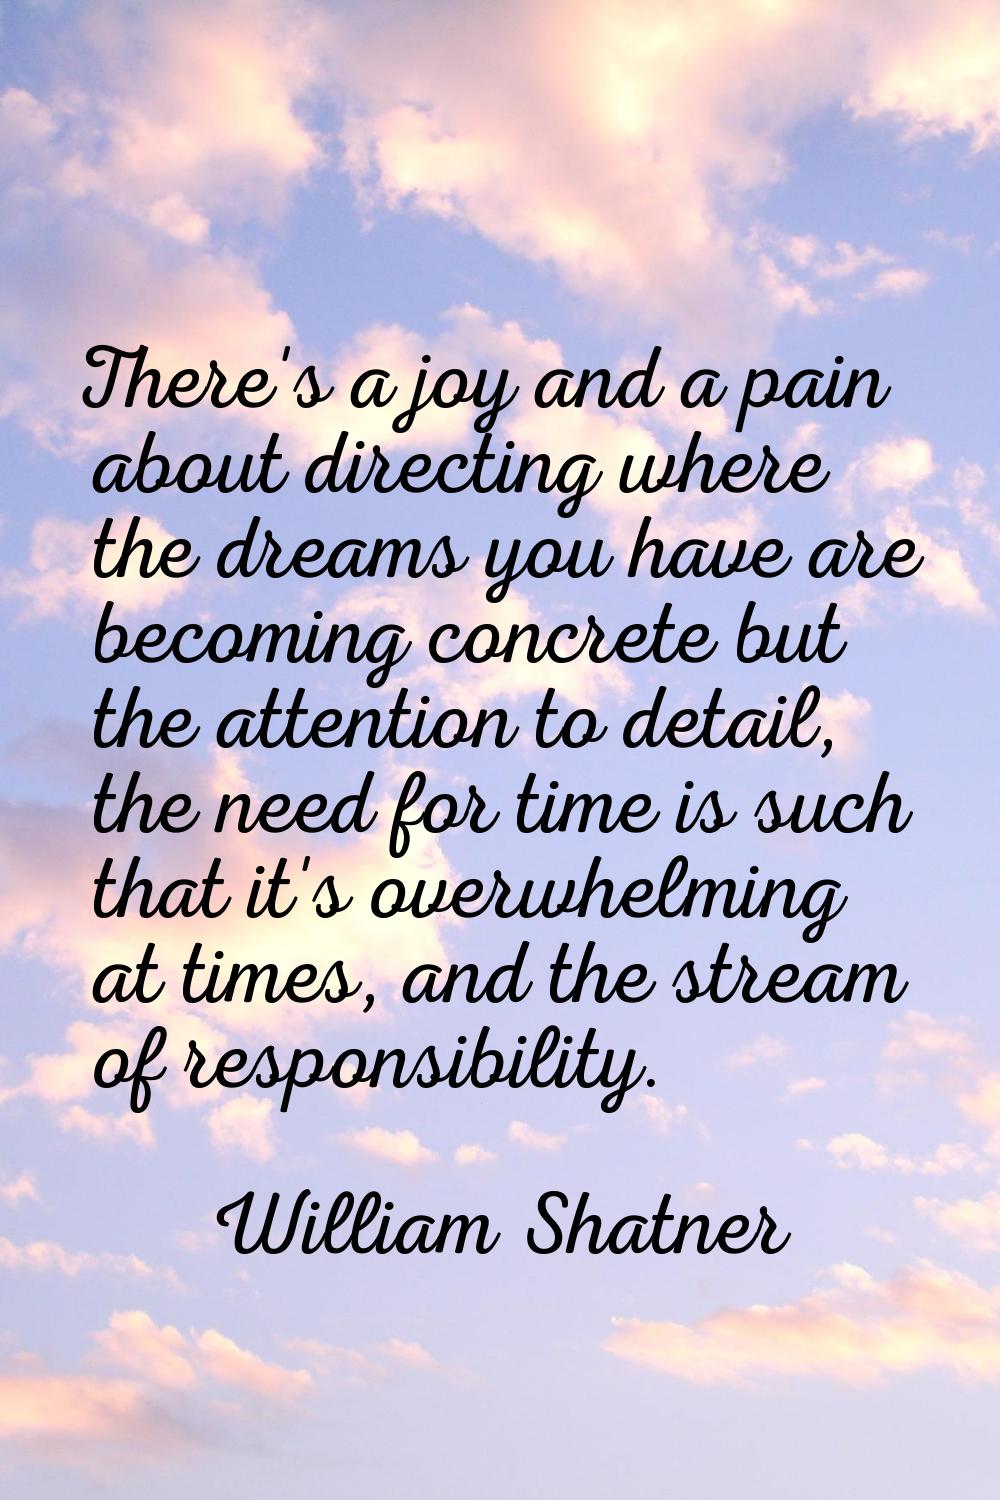 There's a joy and a pain about directing where the dreams you have are becoming concrete but the at